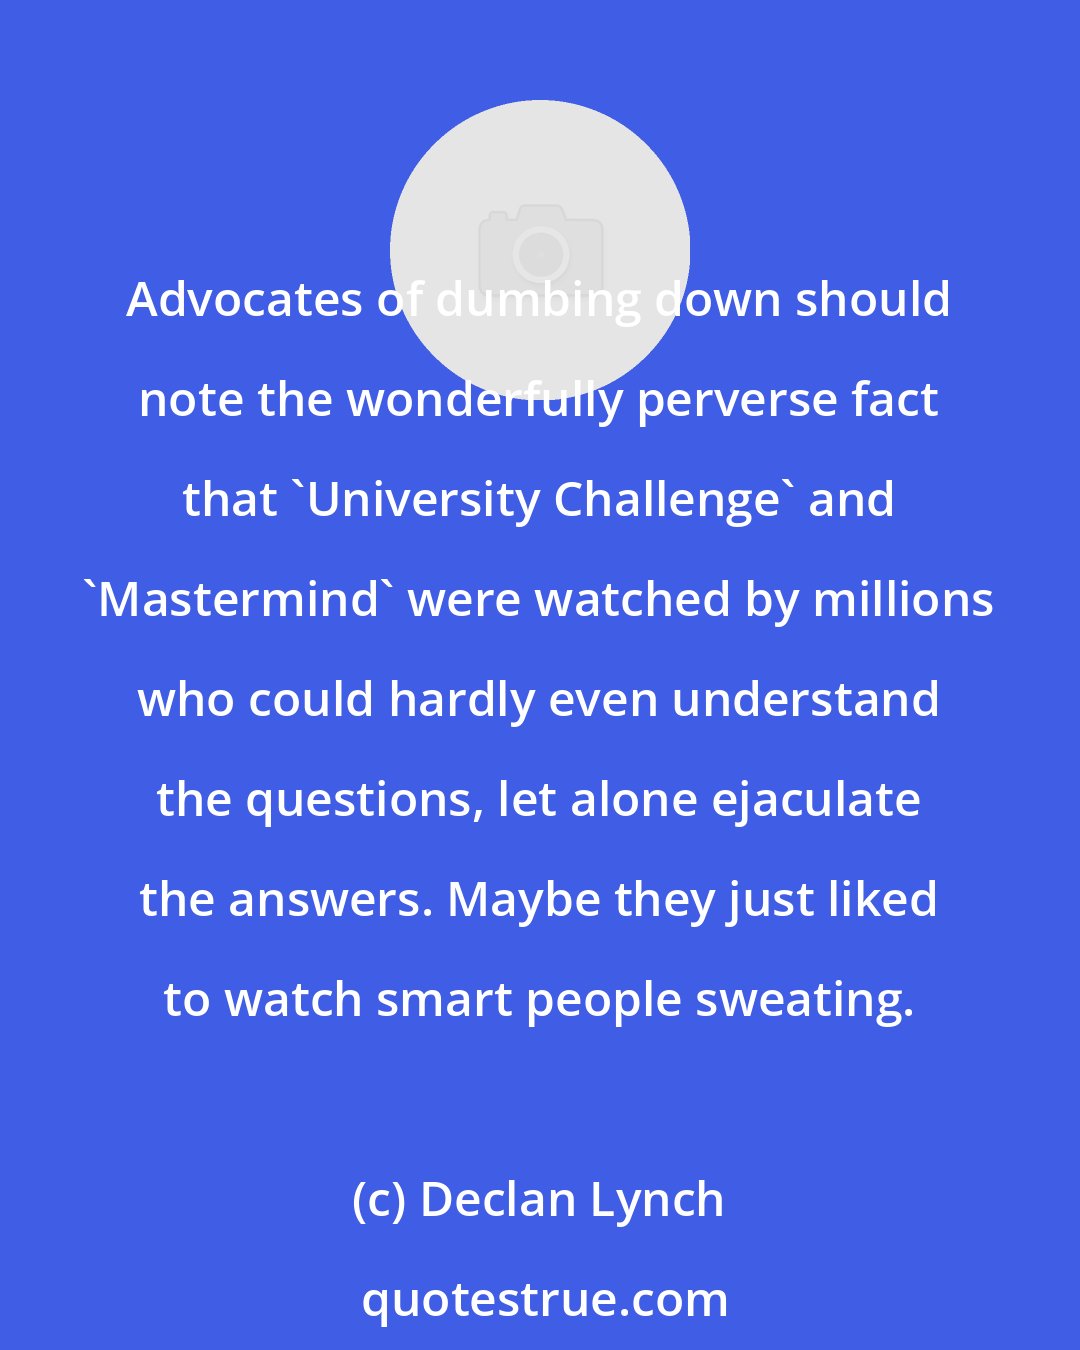 Declan Lynch: Advocates of dumbing down should note the wonderfully perverse fact that 'University Challenge' and 'Mastermind' were watched by millions who could hardly even understand the questions, let alone ejaculate the answers. Maybe they just liked to watch smart people sweating.